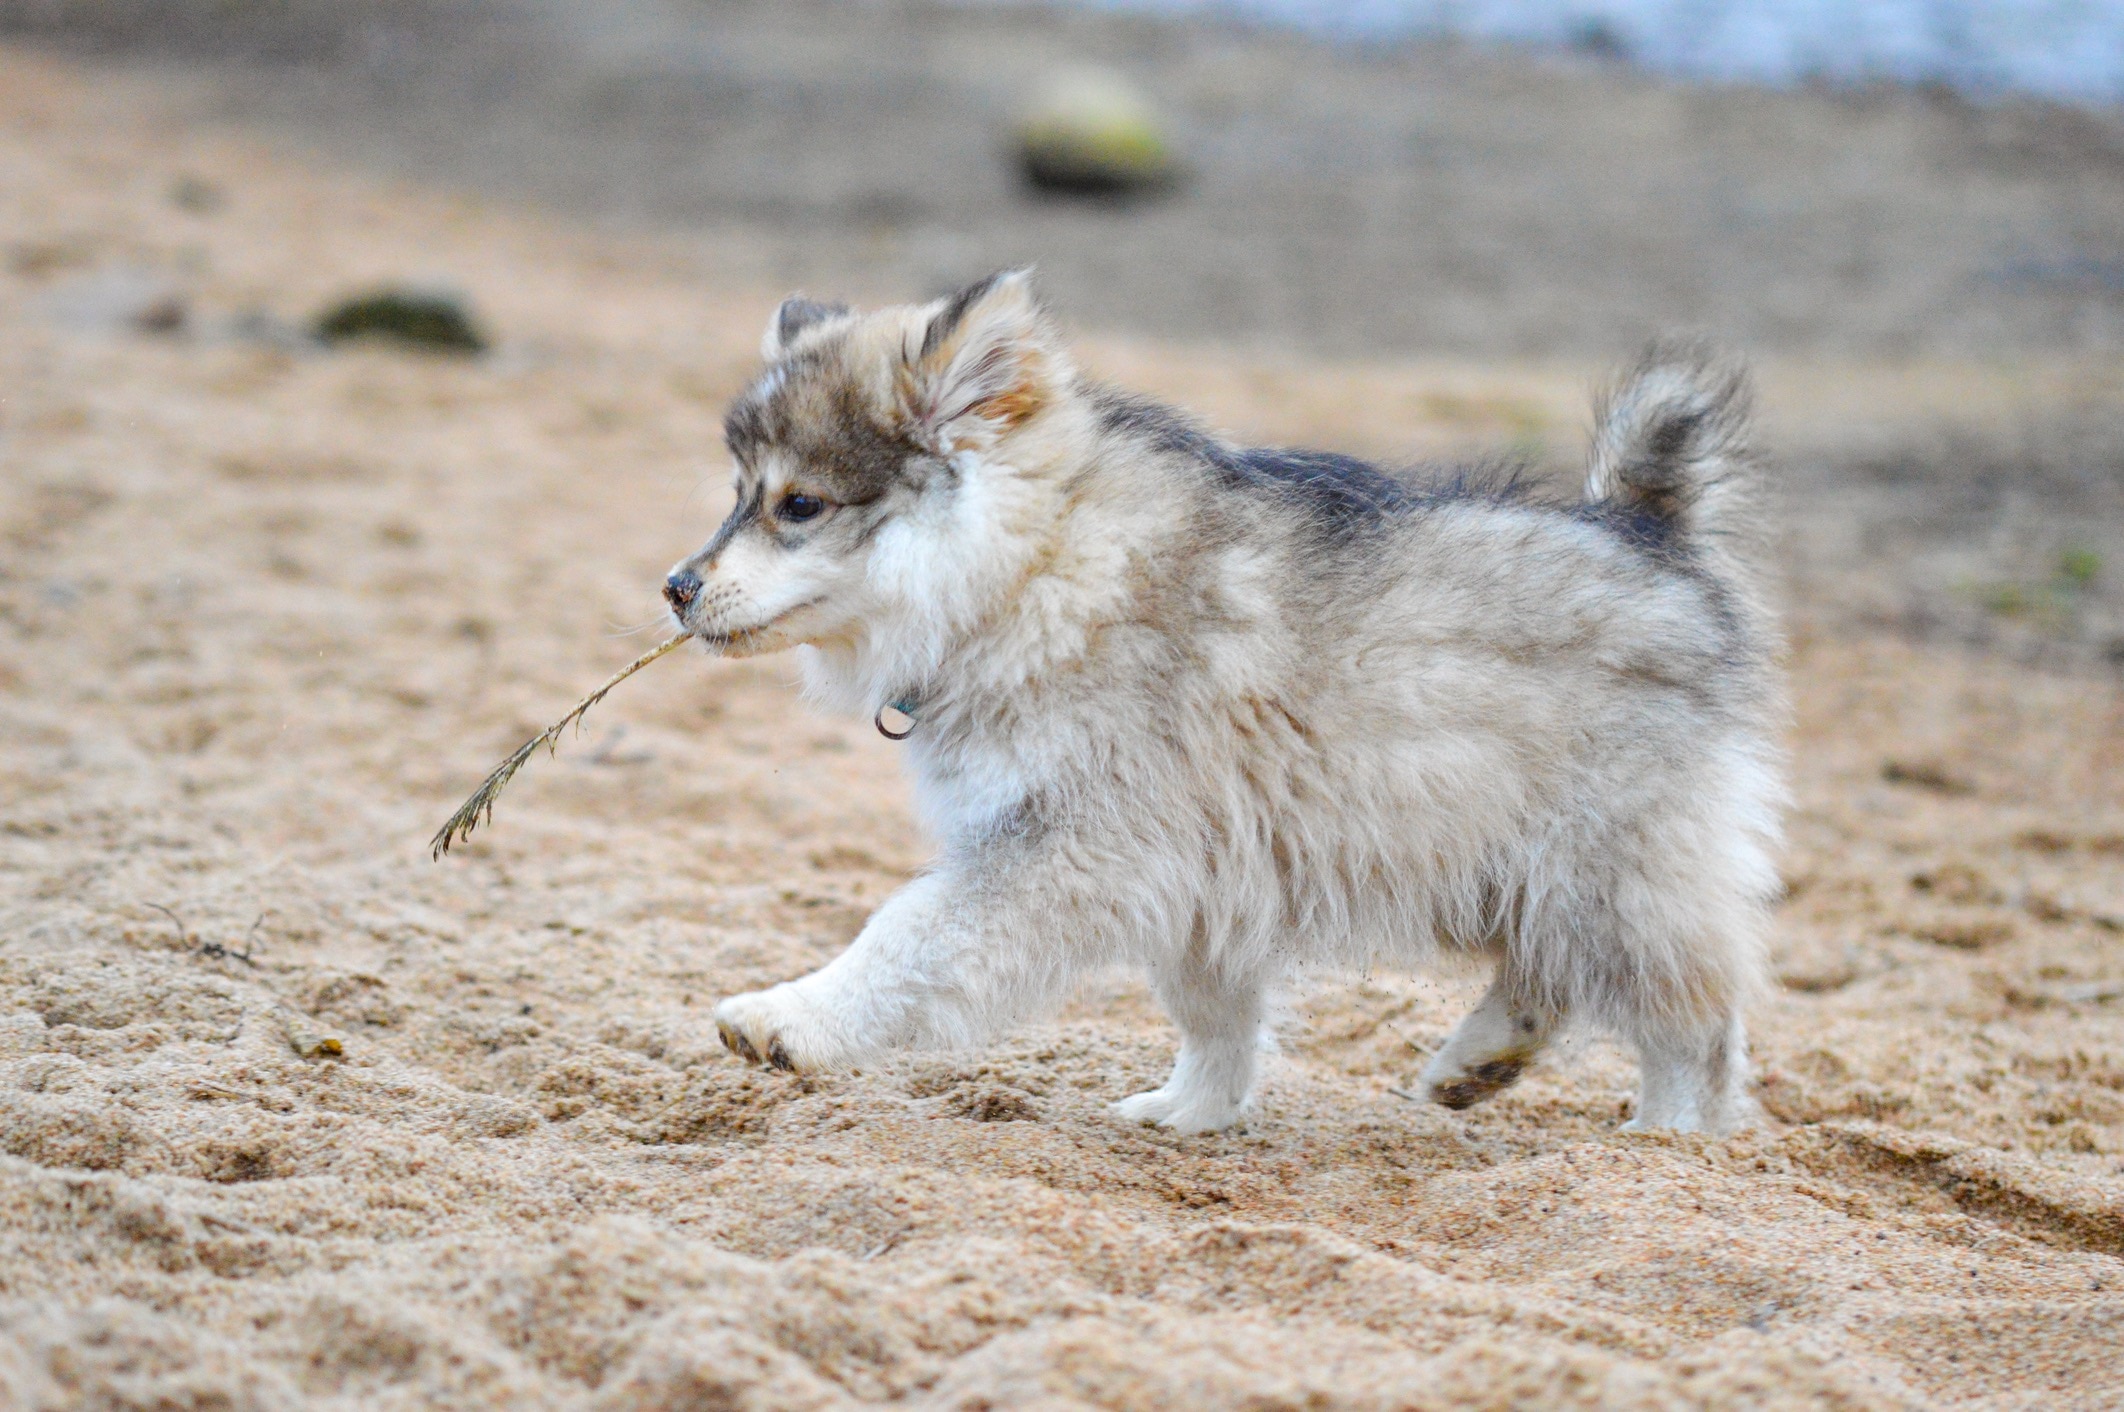 gray finnish lapphund puppy walking on sand with a branch in its mouth